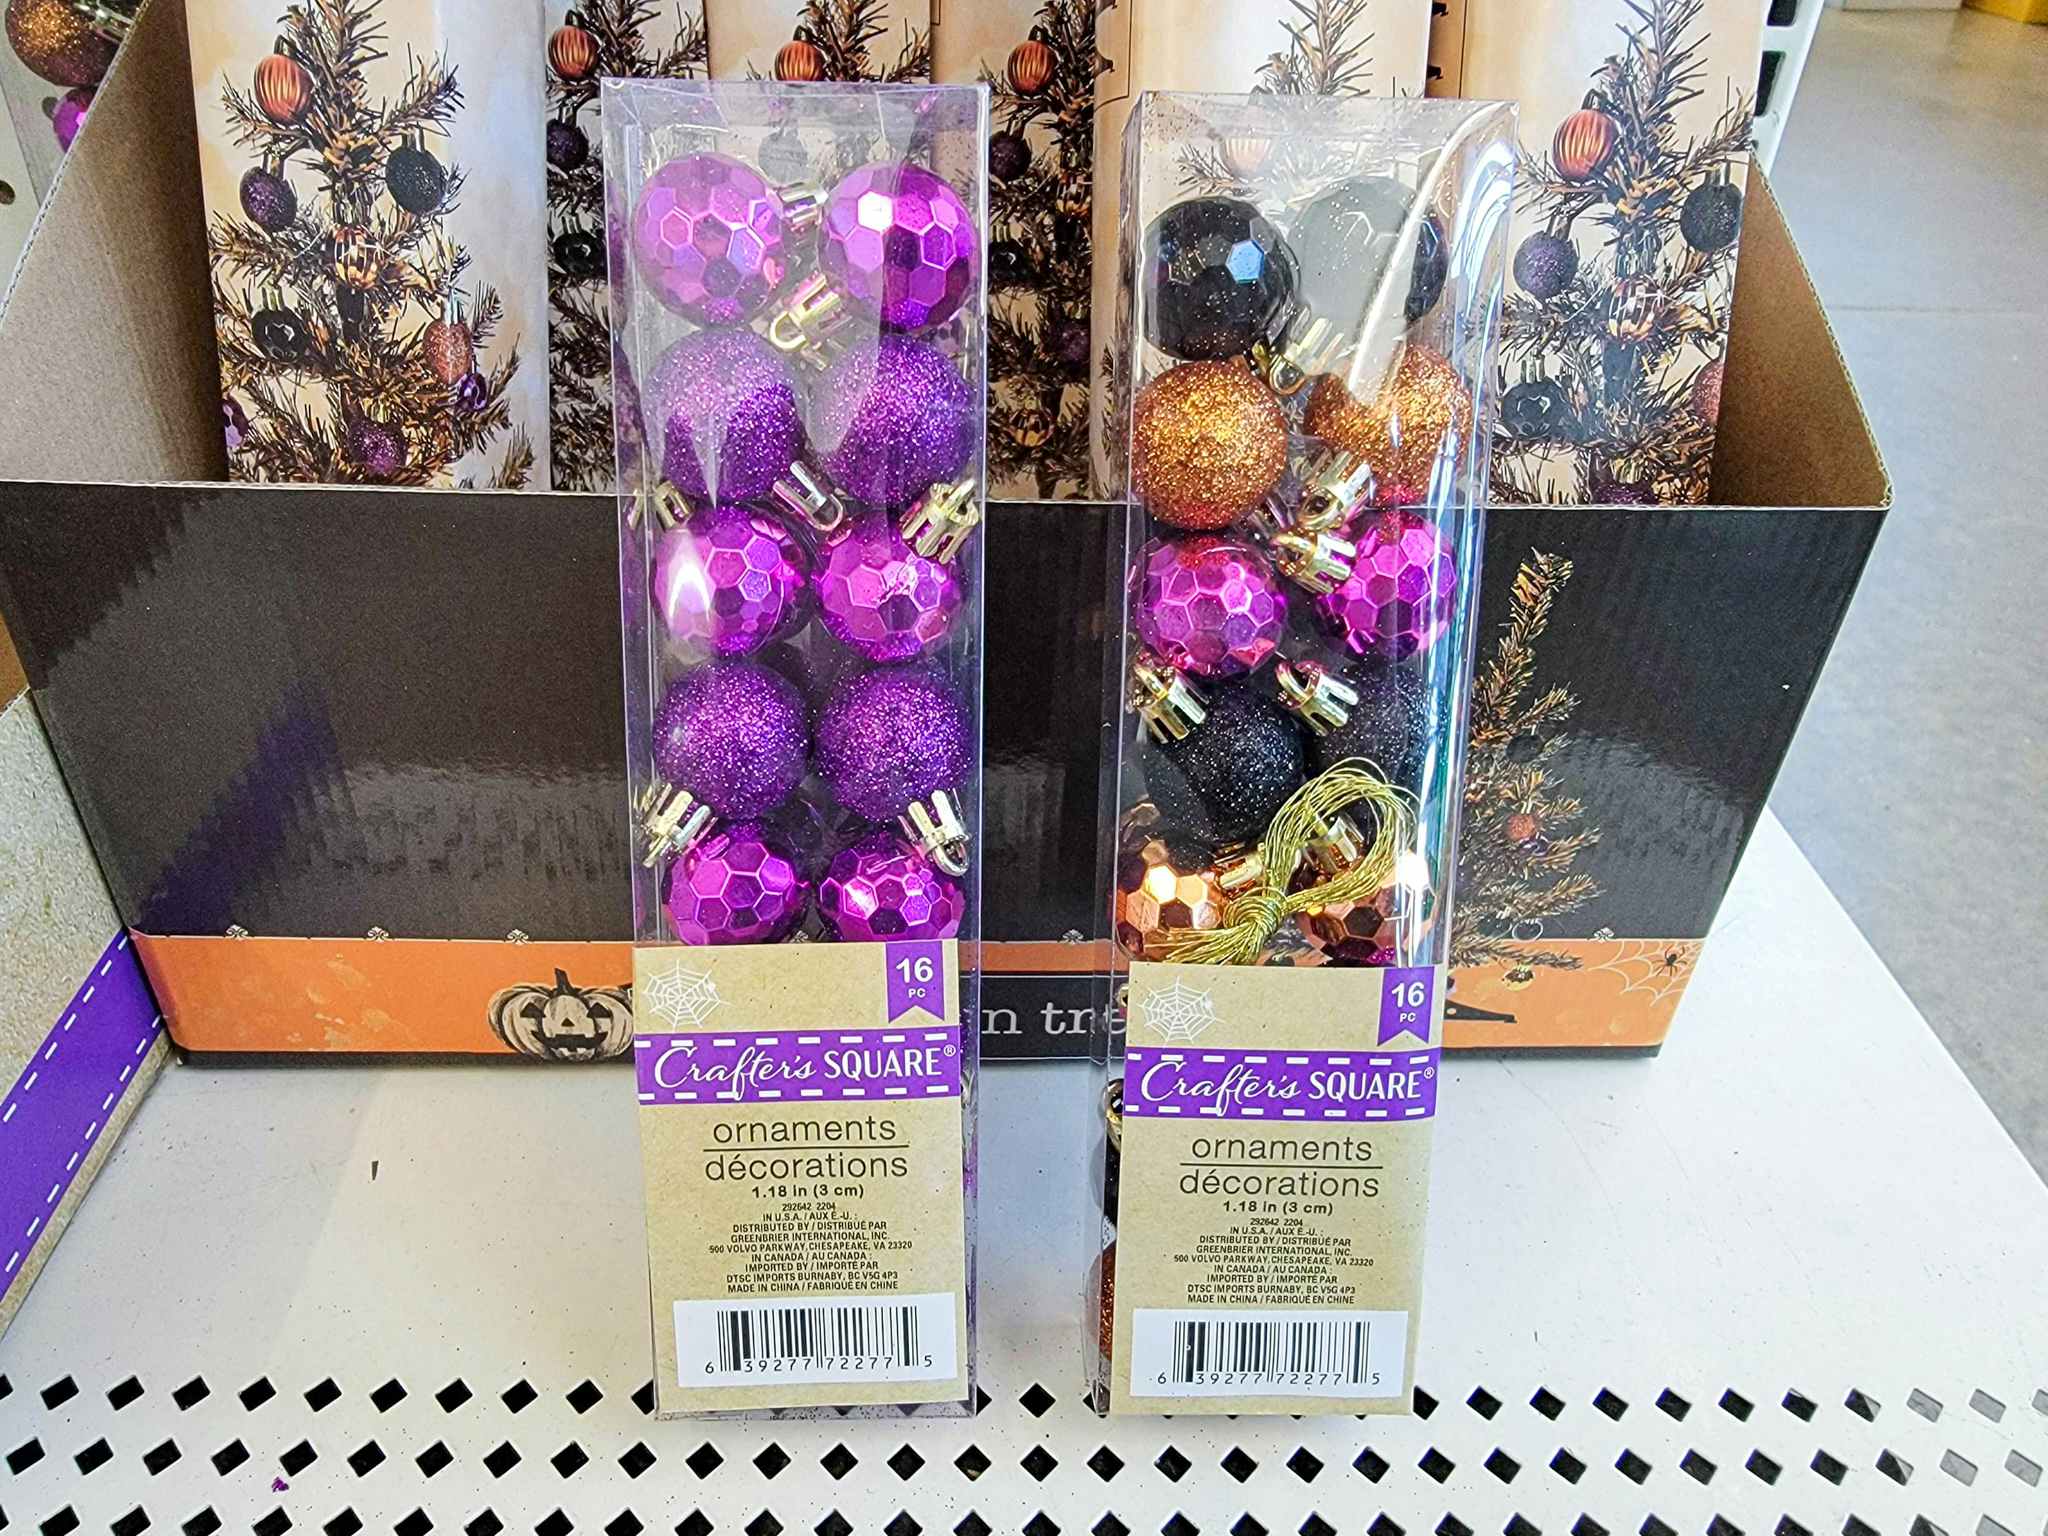 two small packs of purple, orange, and black ornaments for halloween trees